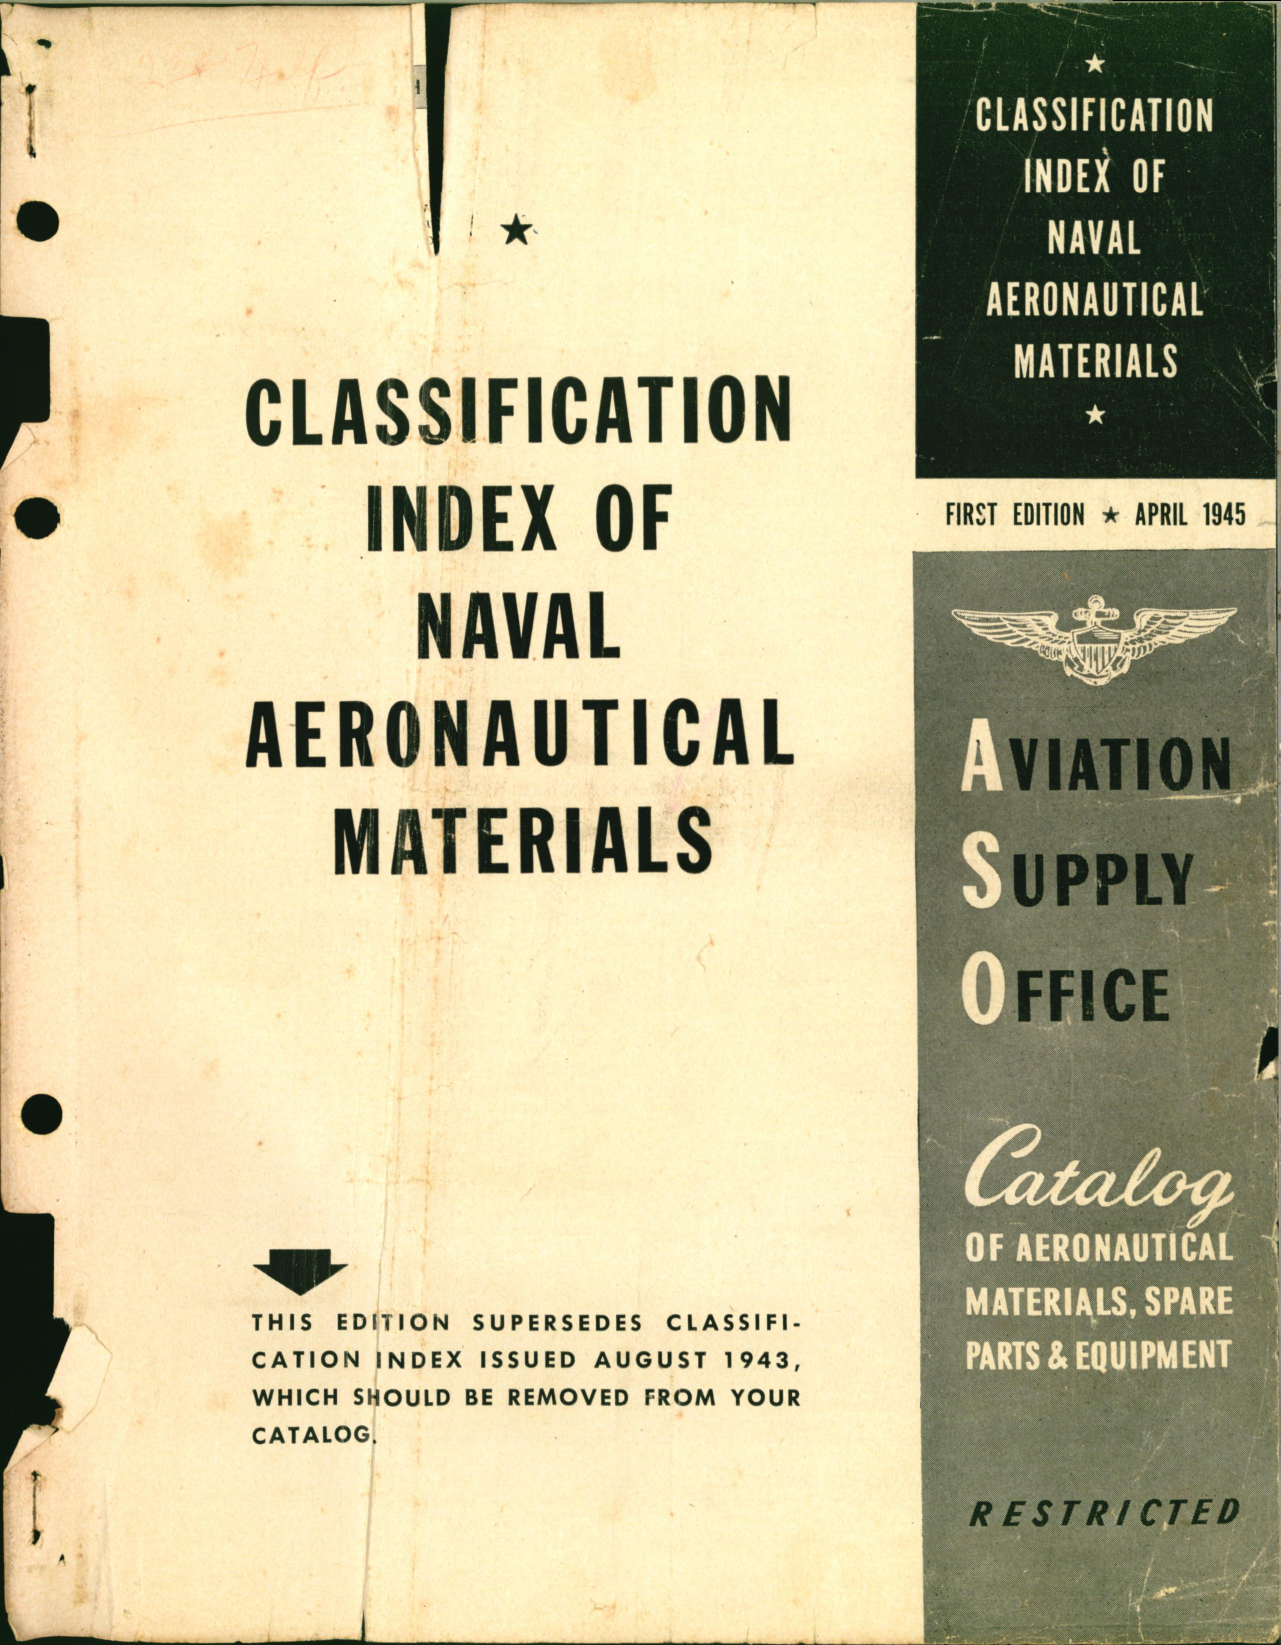 Sample page 1 from AirCorps Library document: Classification Index of Naval Aeronautical Materials 